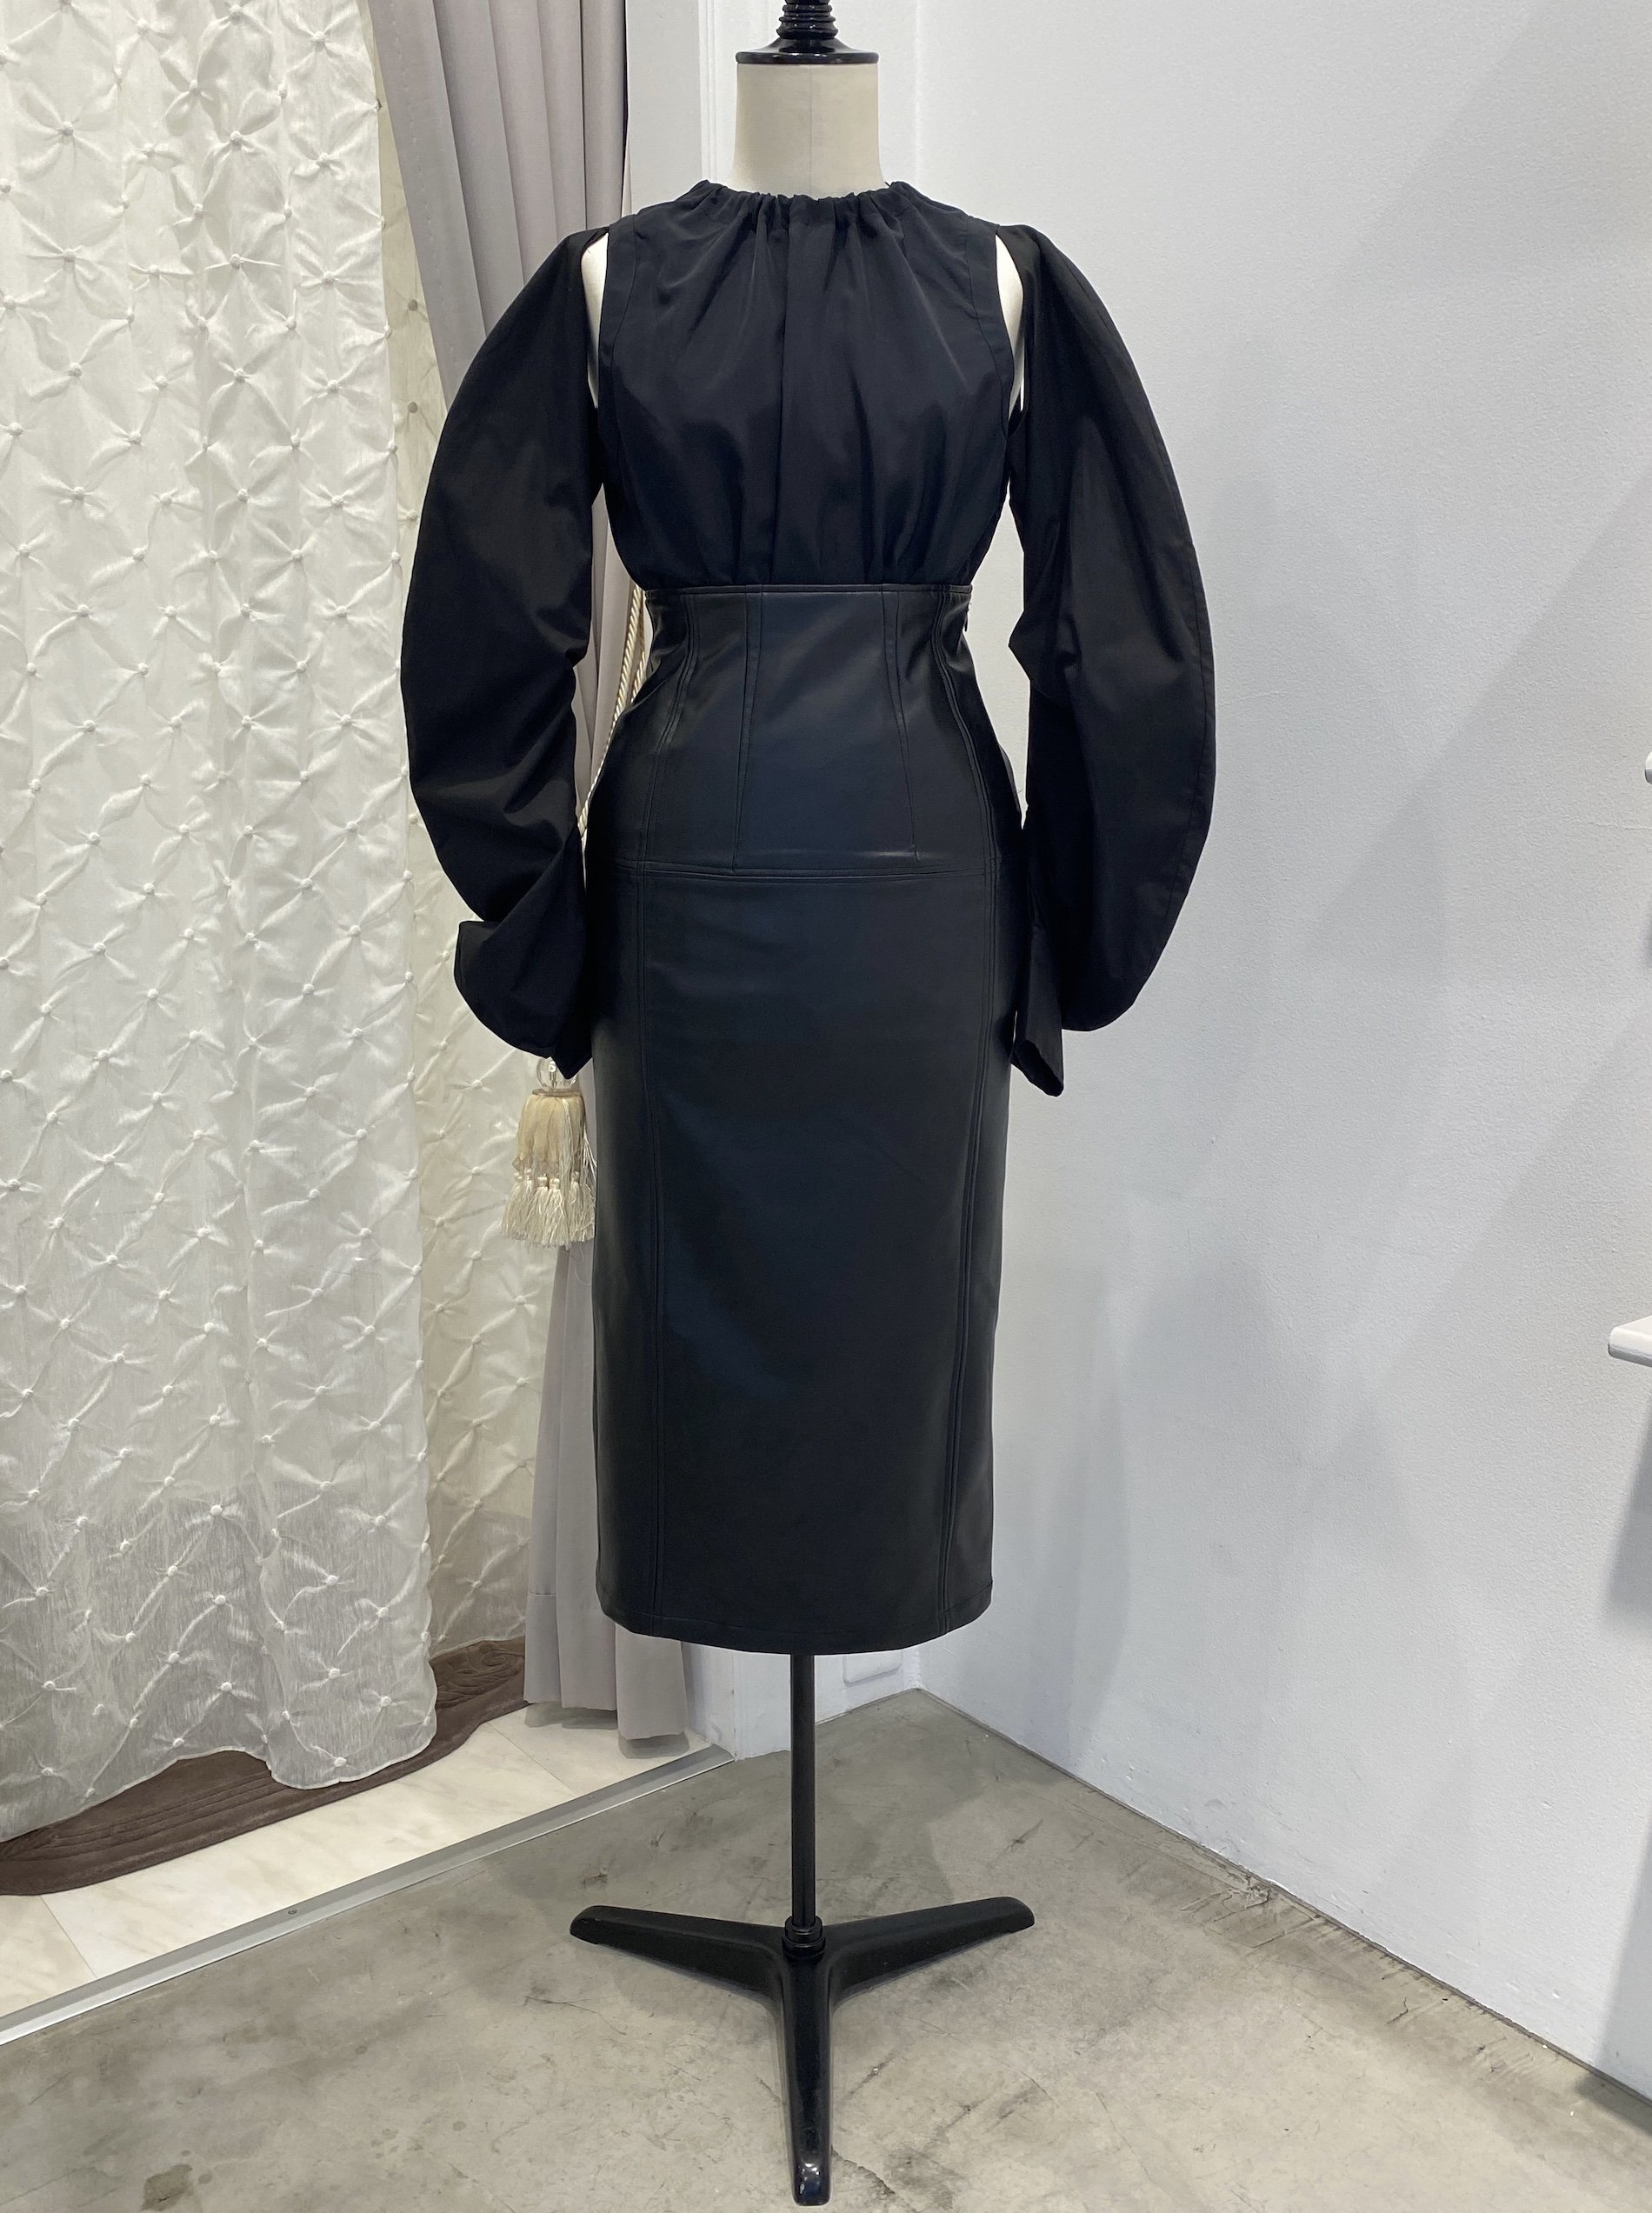 <img class='new_mark_img1' src='https://img.shop-pro.jp/img/new/icons8.gif' style='border:none;display:inline;margin:0px;padding:0px;width:auto;' />f's6 Leather skirt / Black 